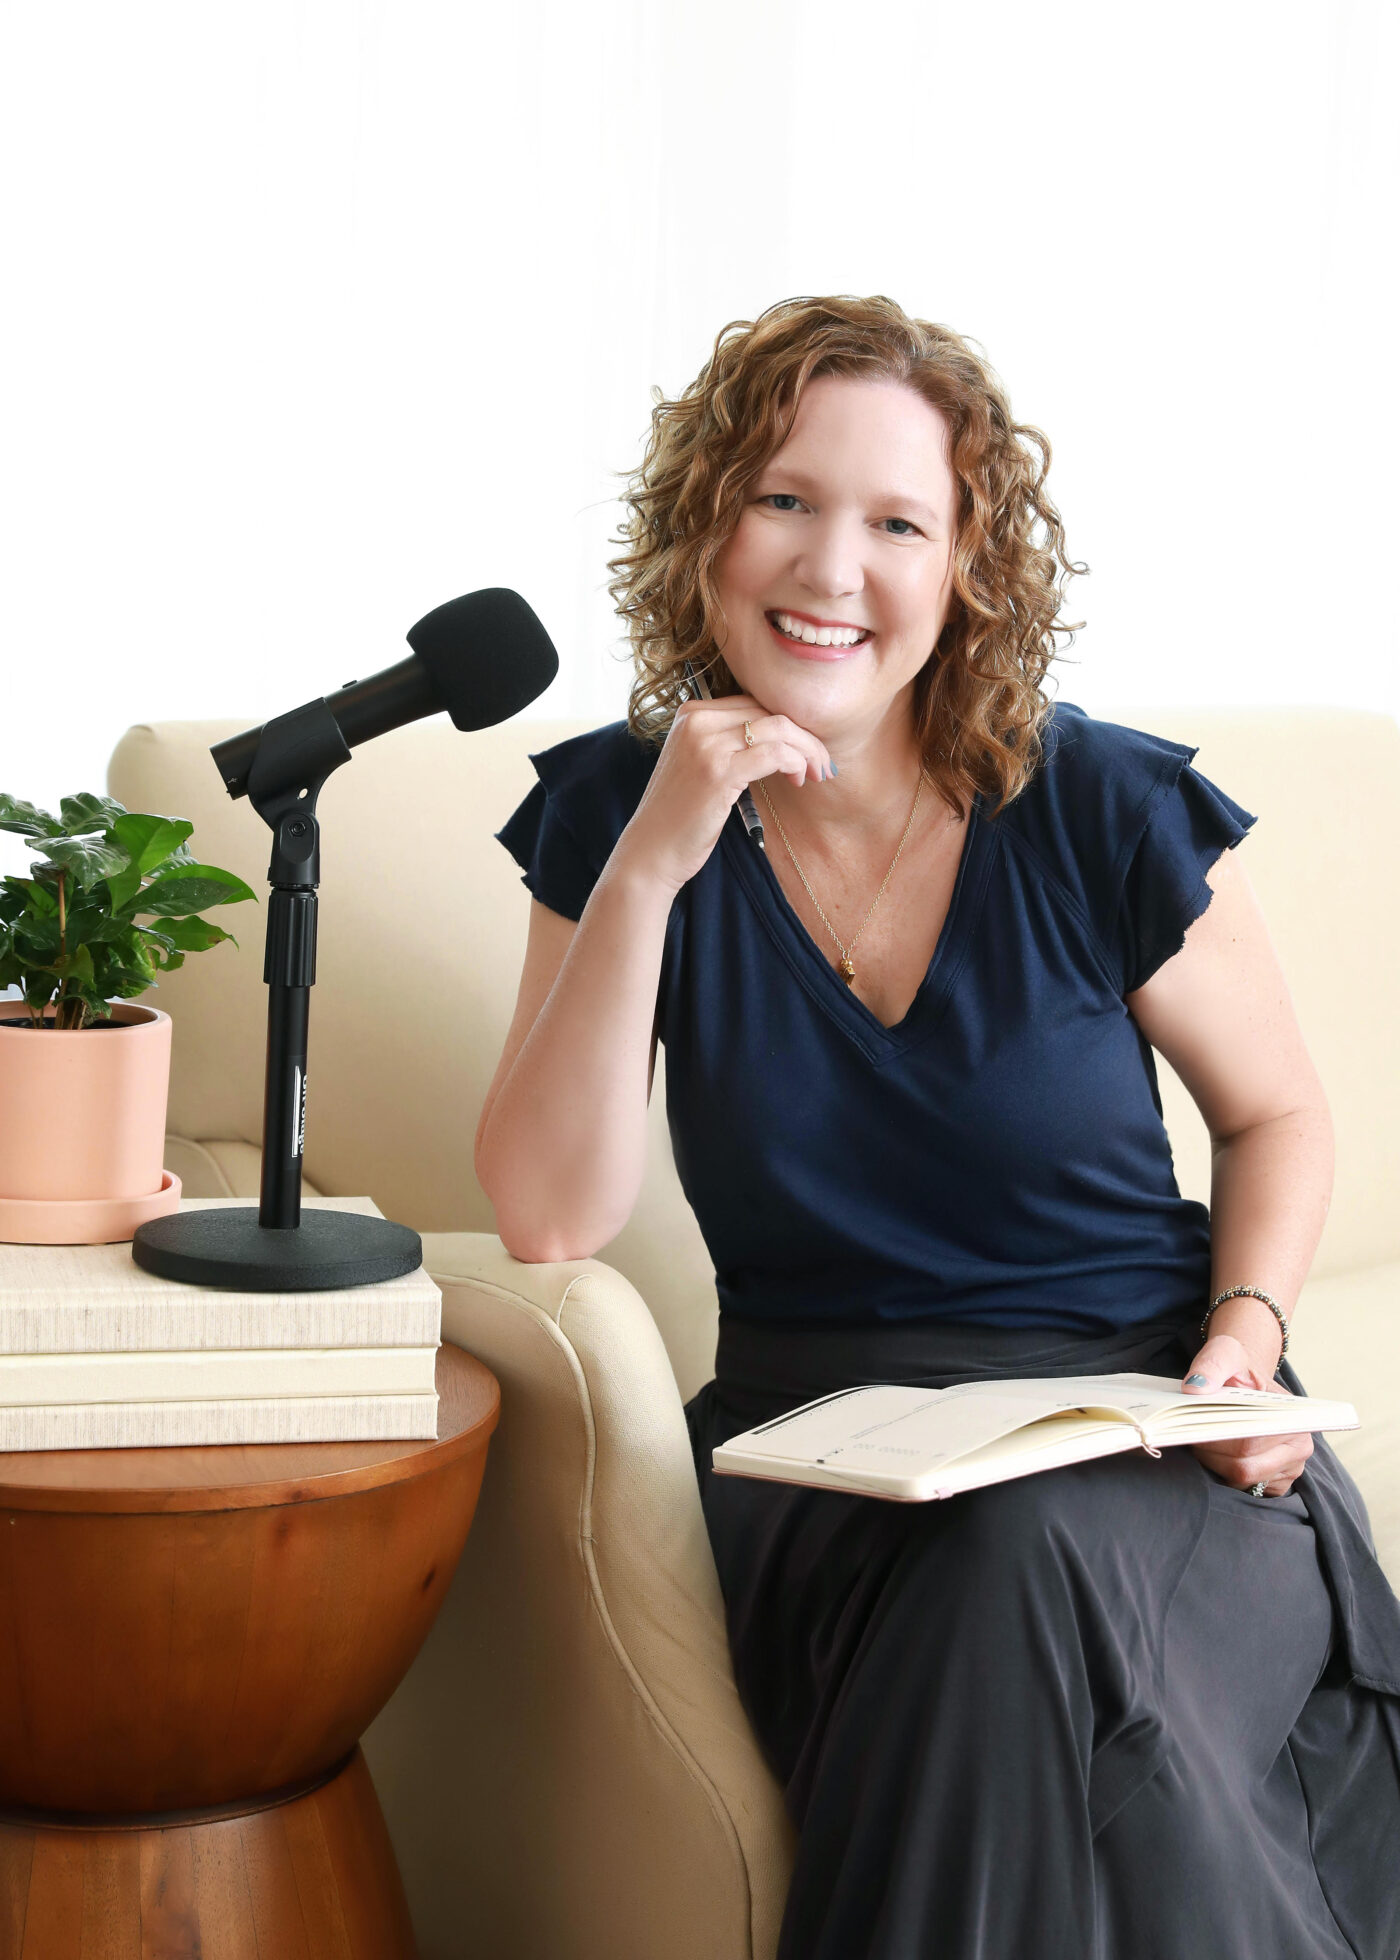 Ep. 7: Shame Free Eating with Dietician Julie Satterfeal